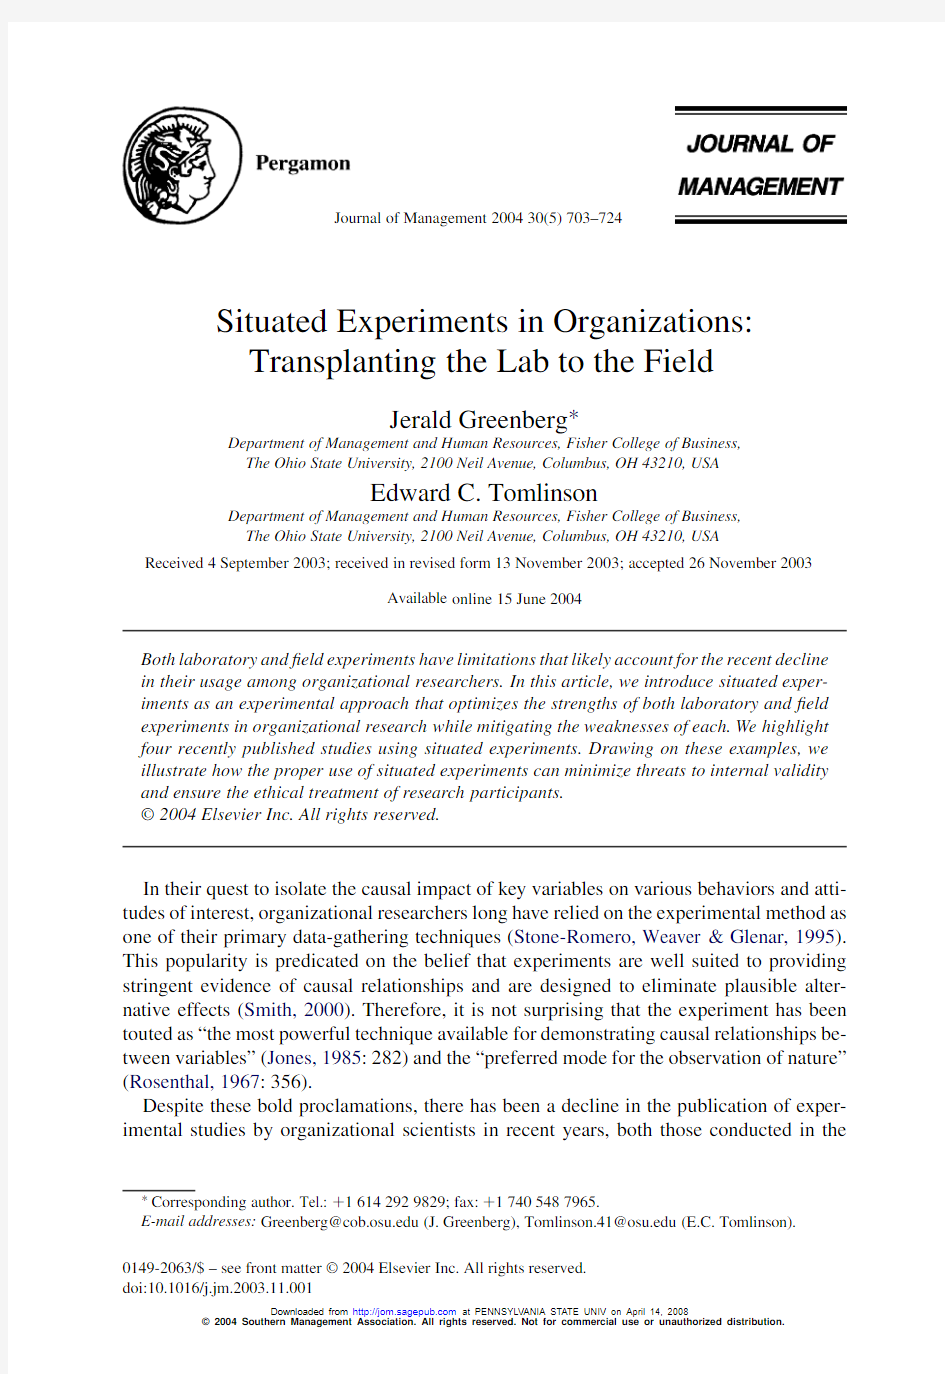 Situated Experiments in Organizations Transplanting the Lab to the Field